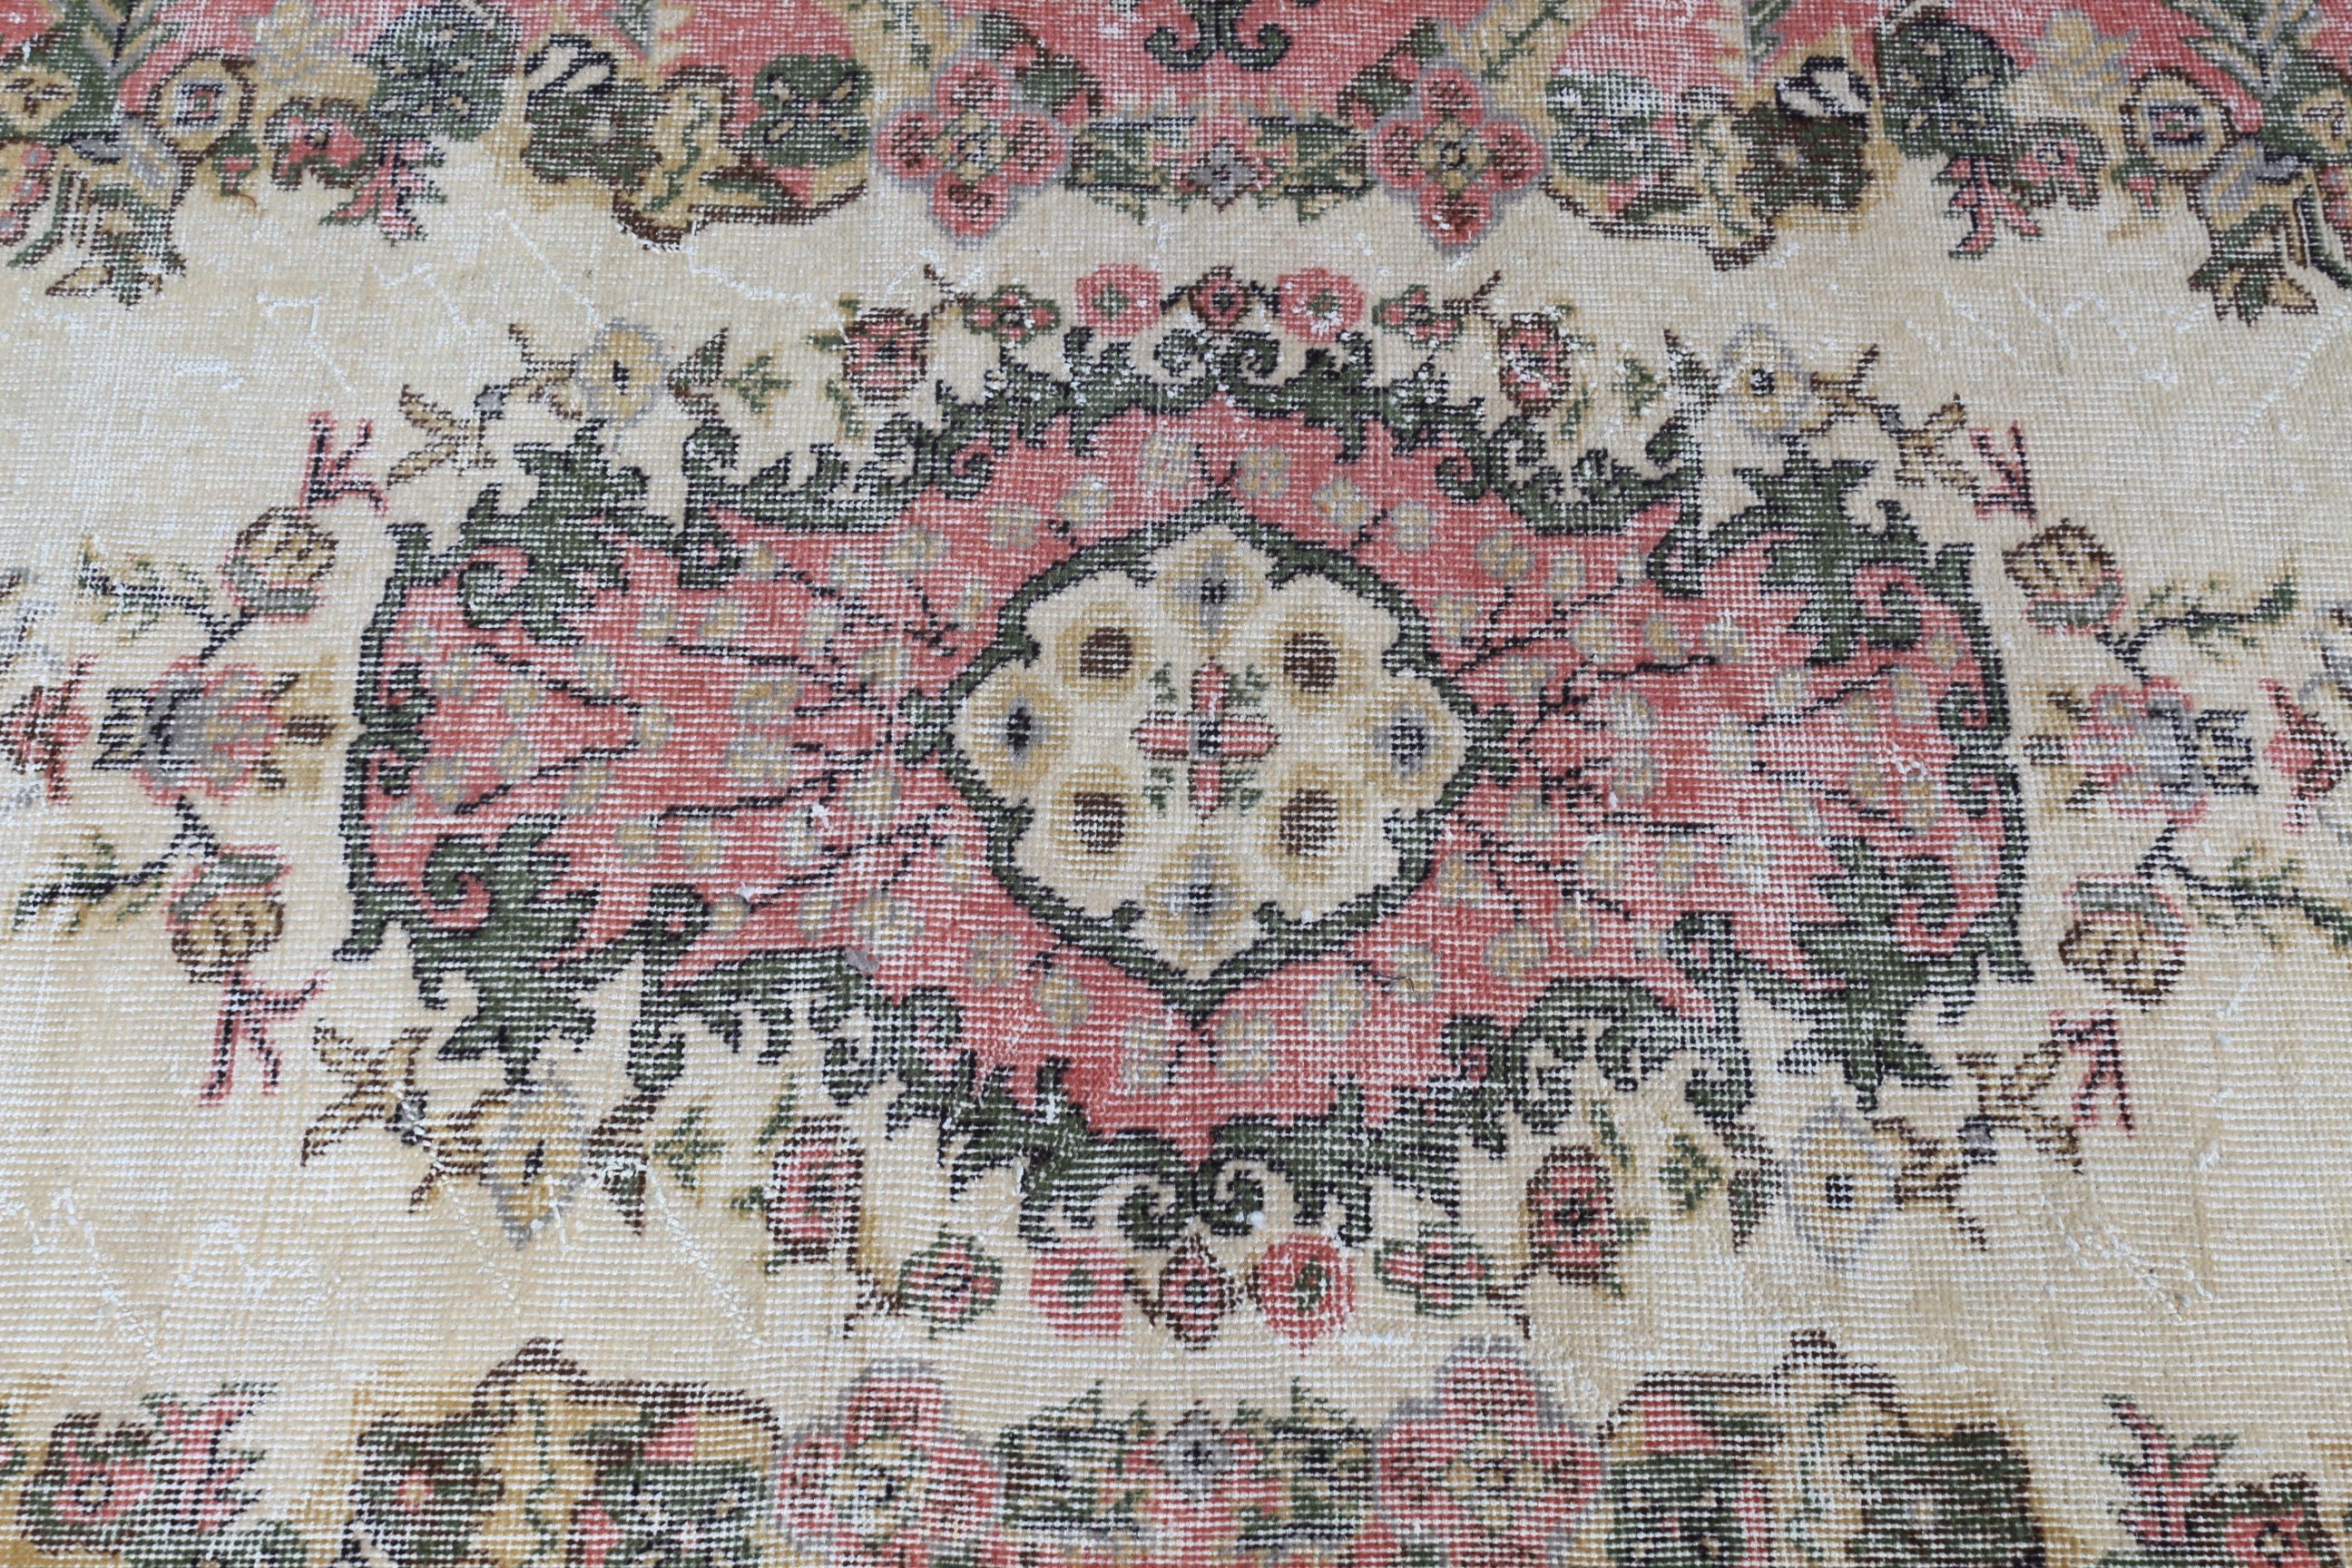 Vintage Rug, Wool Rugs, Turkish Rugs, Kitchen Rugs, Rugs for Indoor, Red Antique Rug, Home Decor Rugs, Bedroom Rugs, 3.8x6.8 ft Area Rug